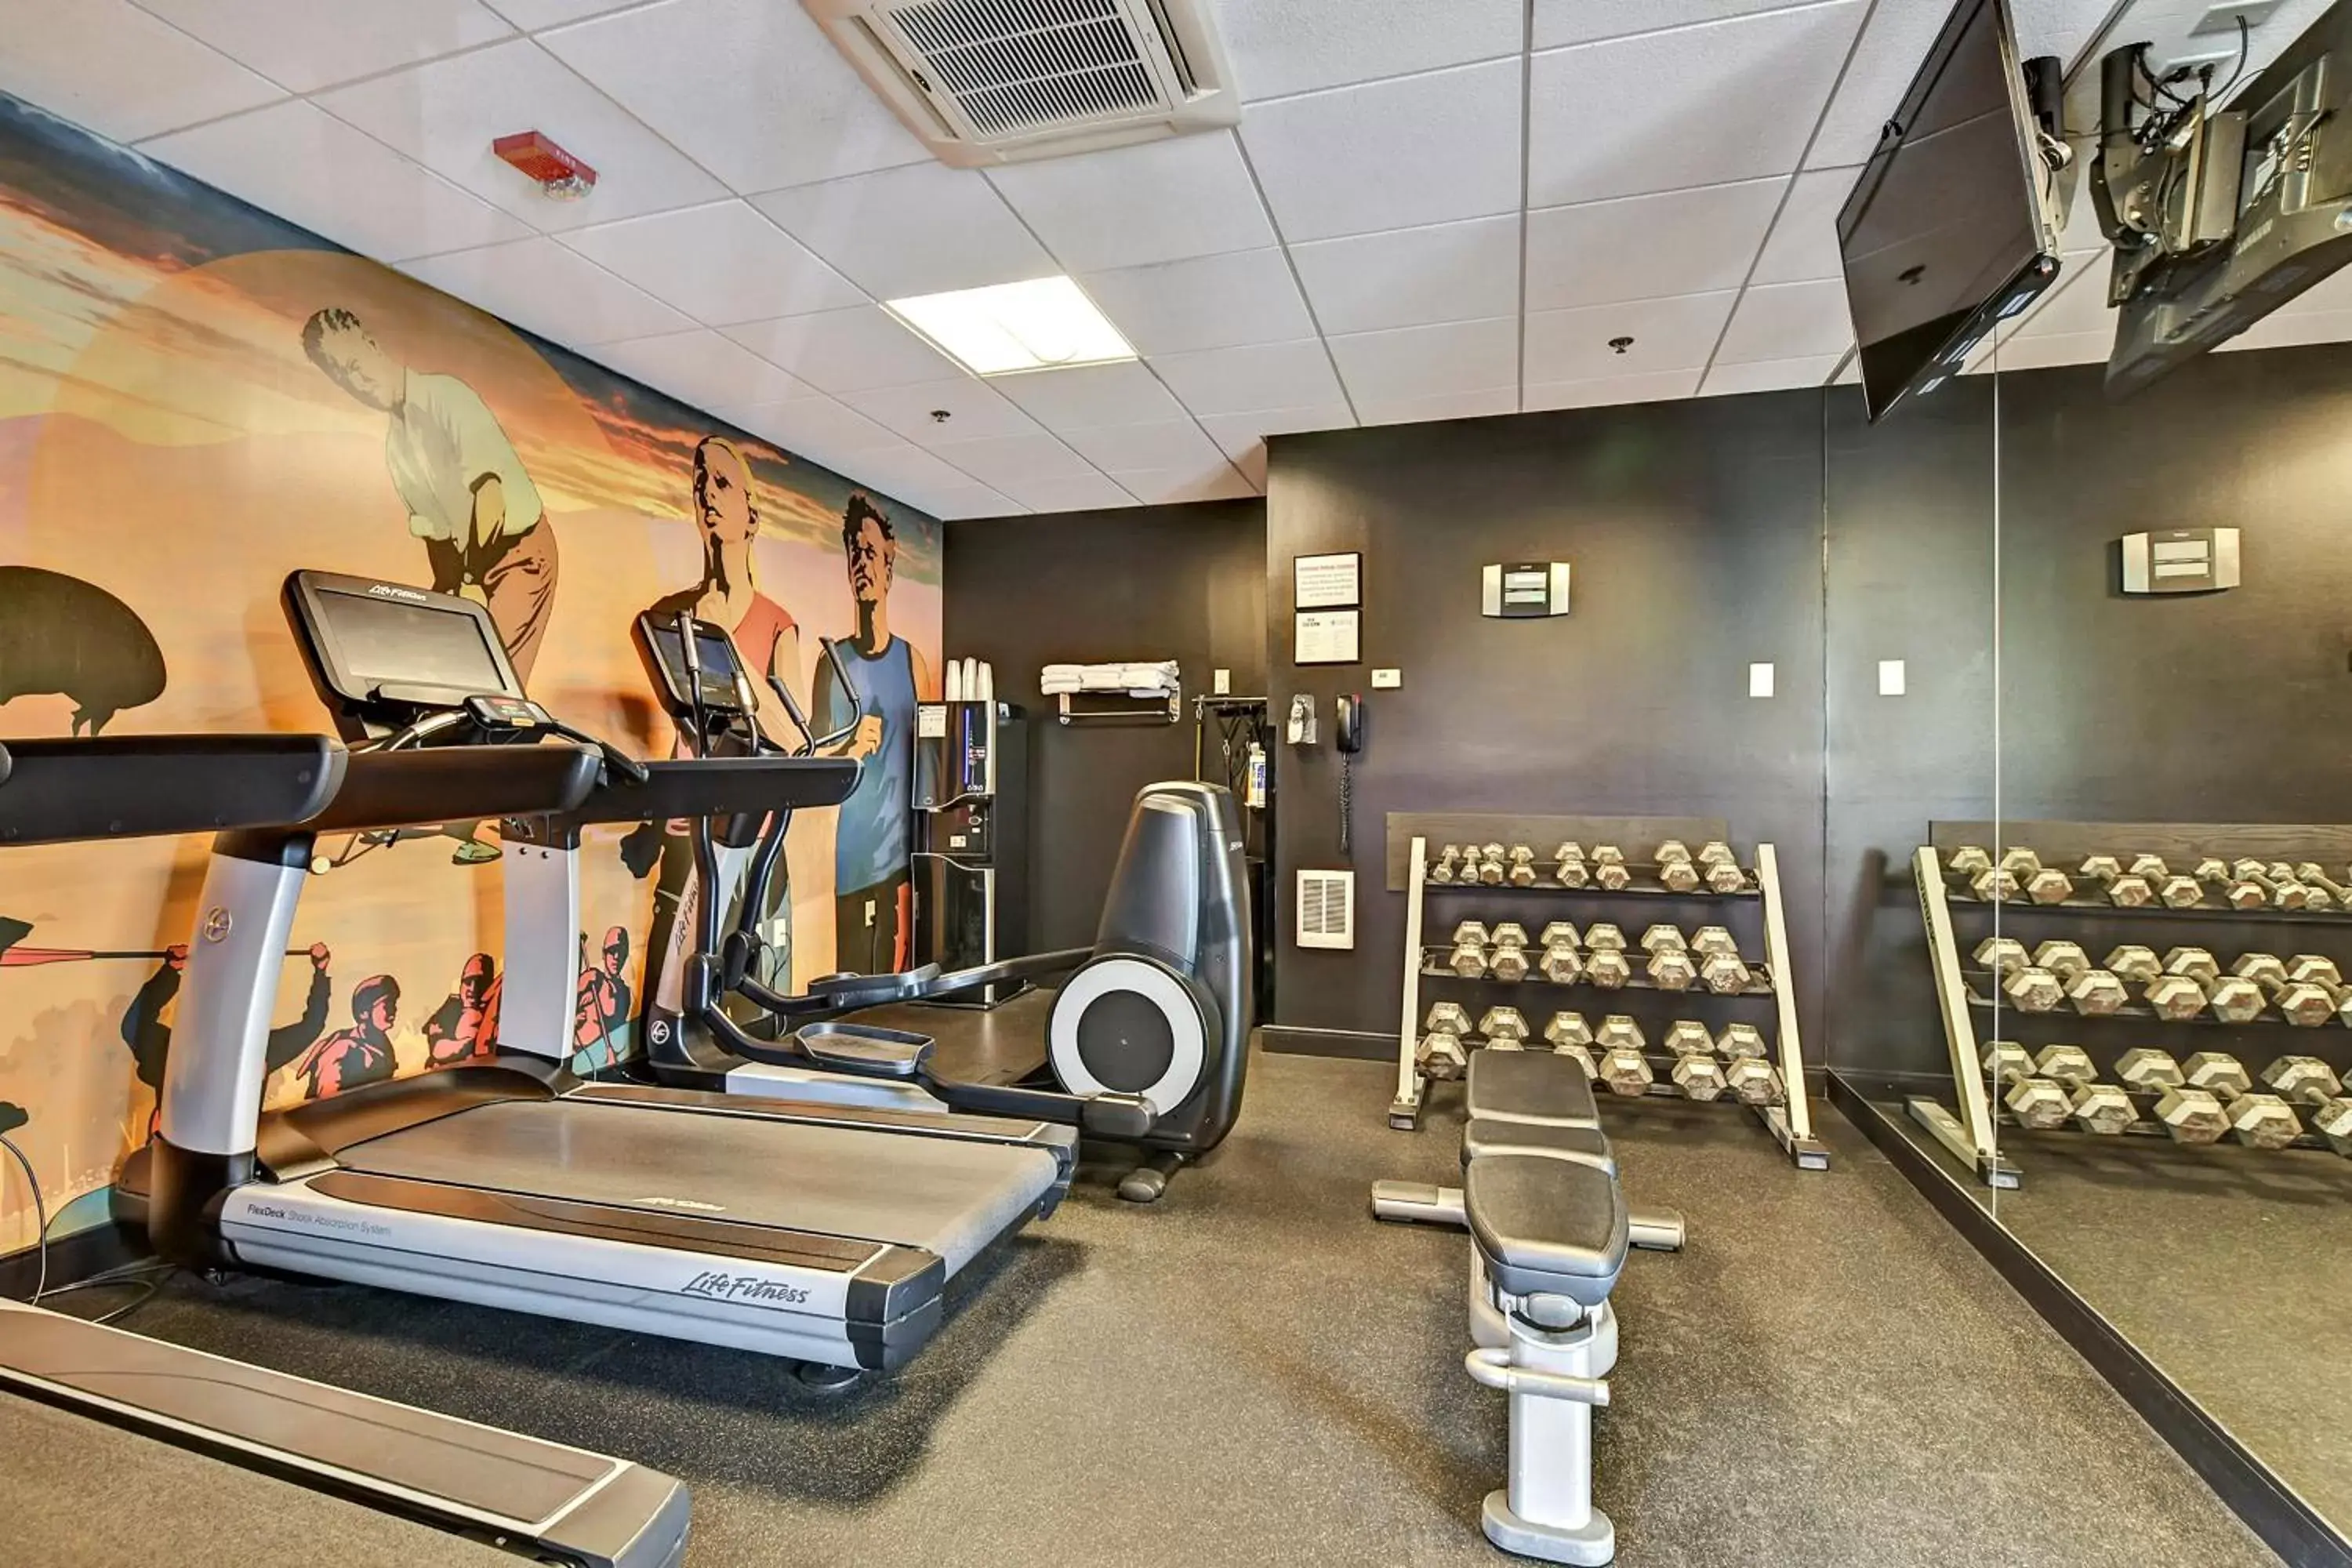 Fitness centre/facilities, Fitness Center/Facilities in Hotel 43 Boise